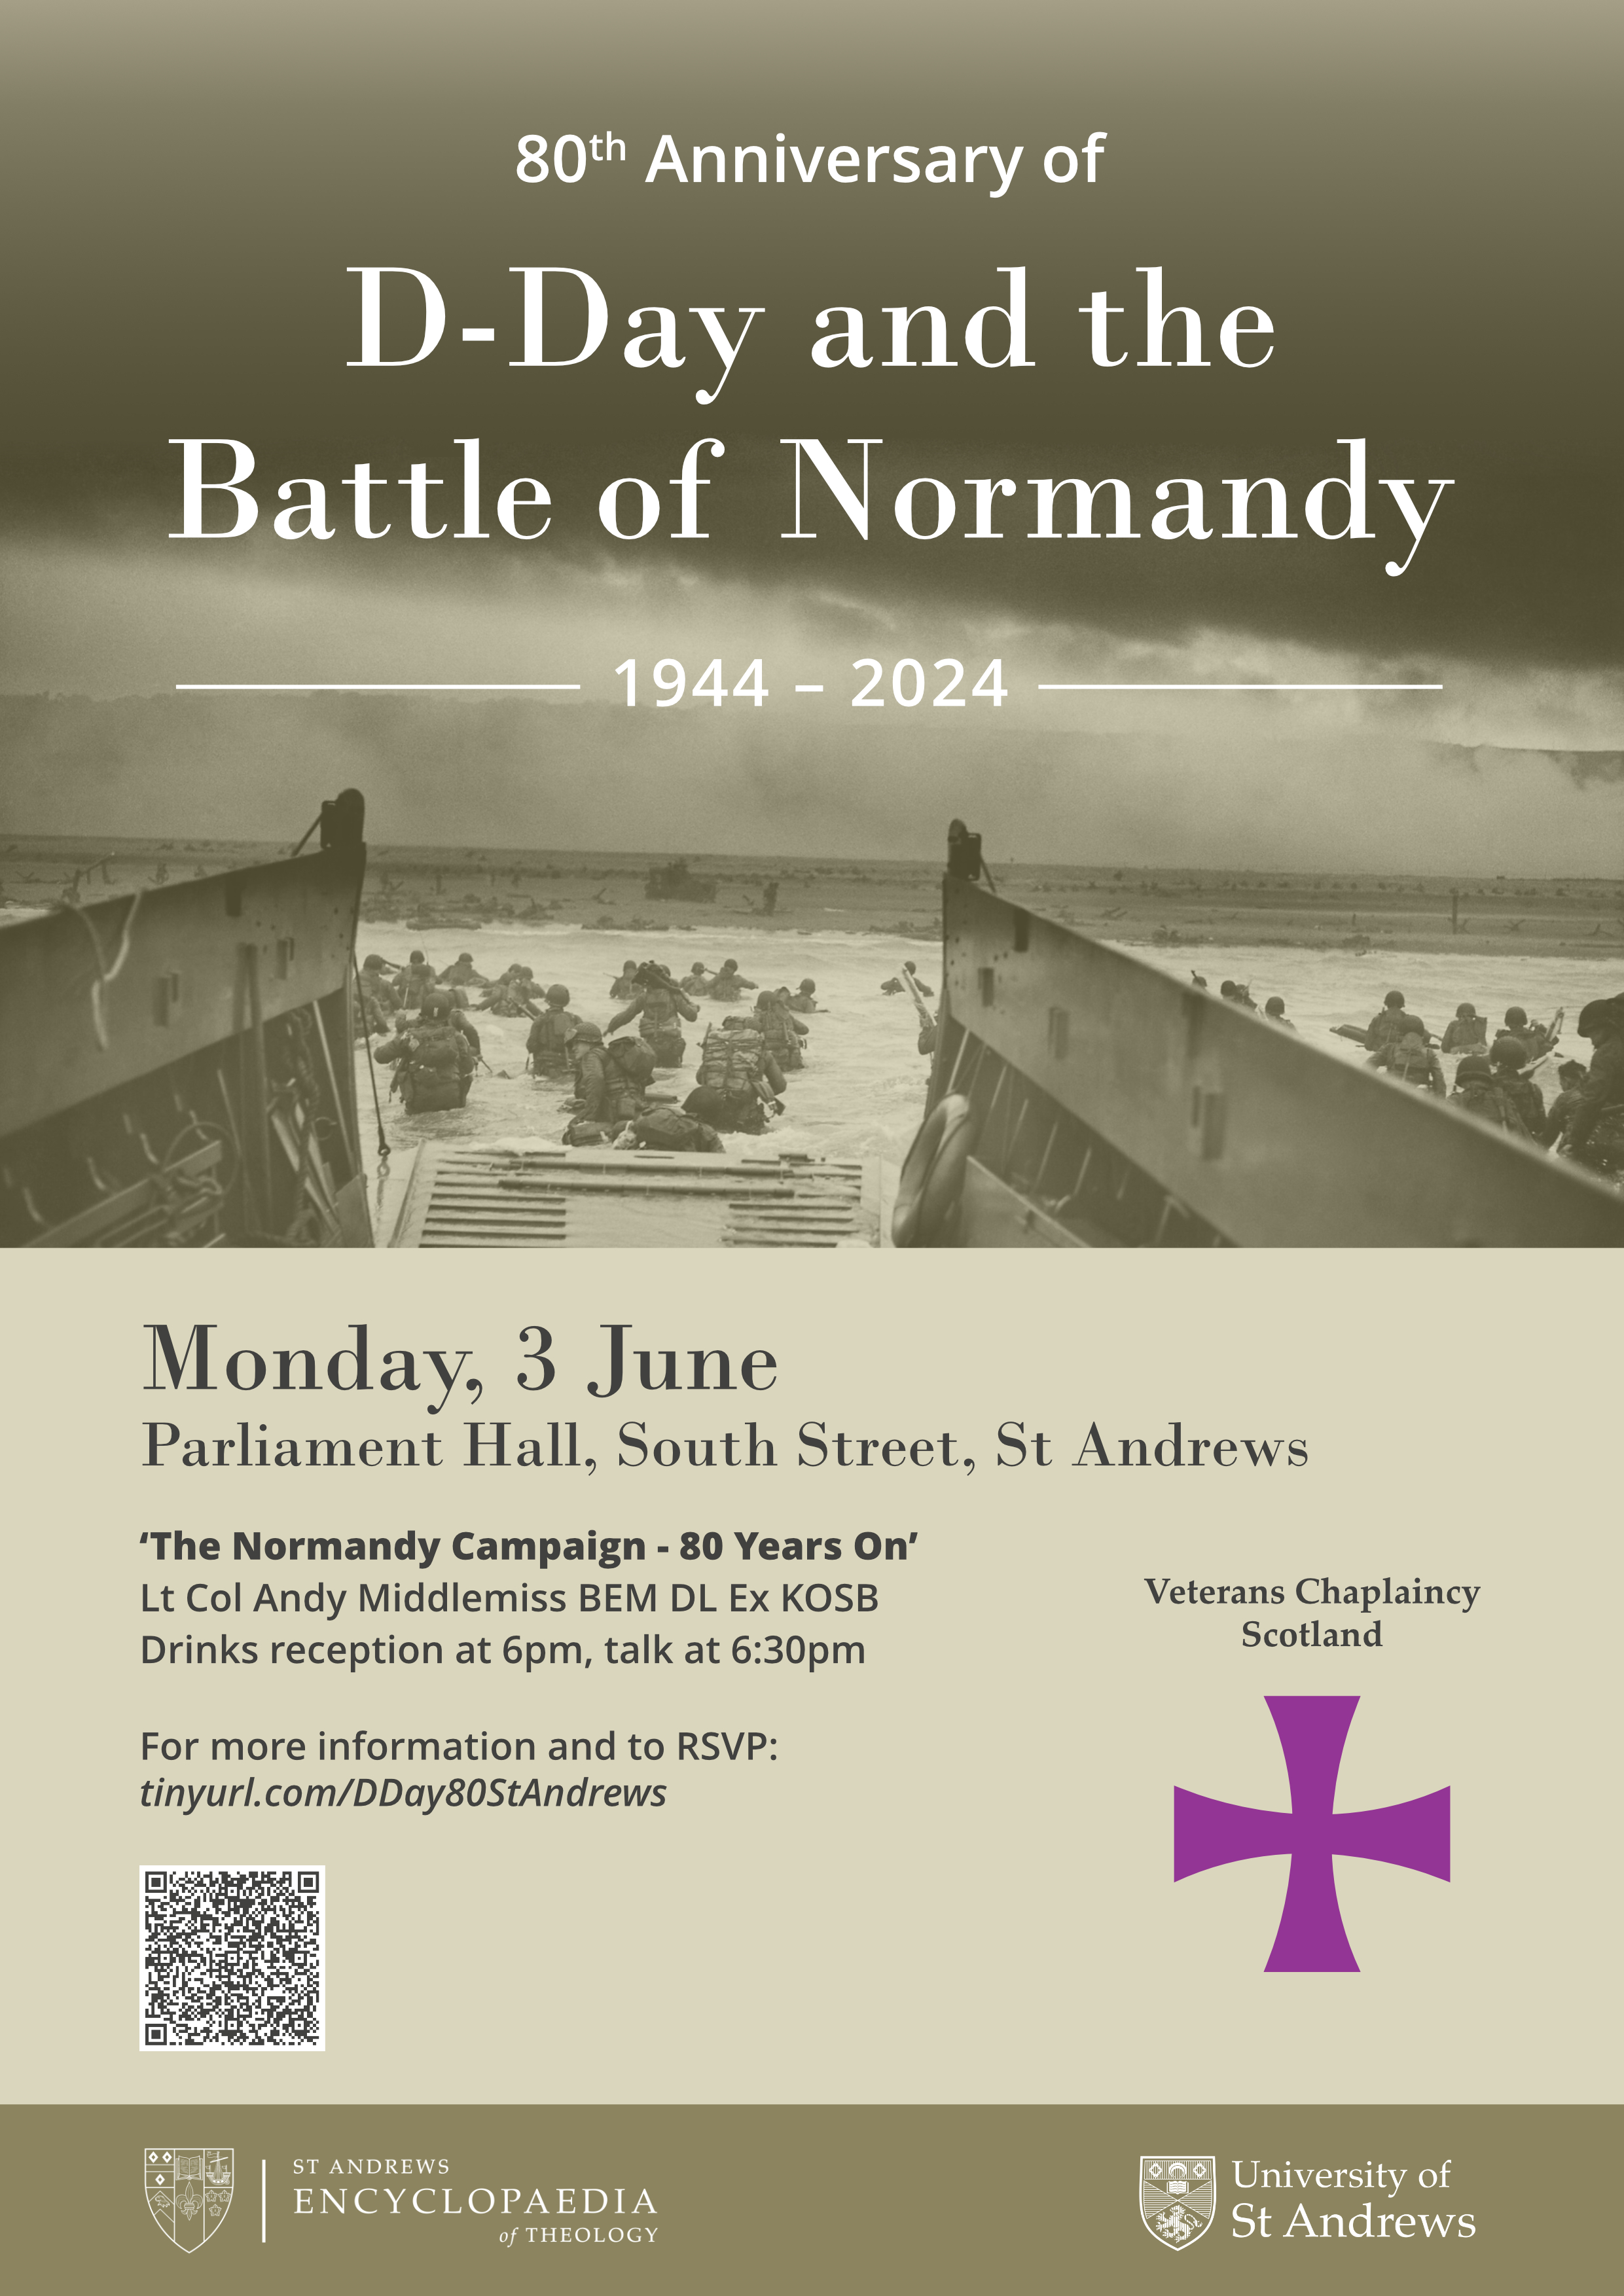 Event poster with photo of D-Day